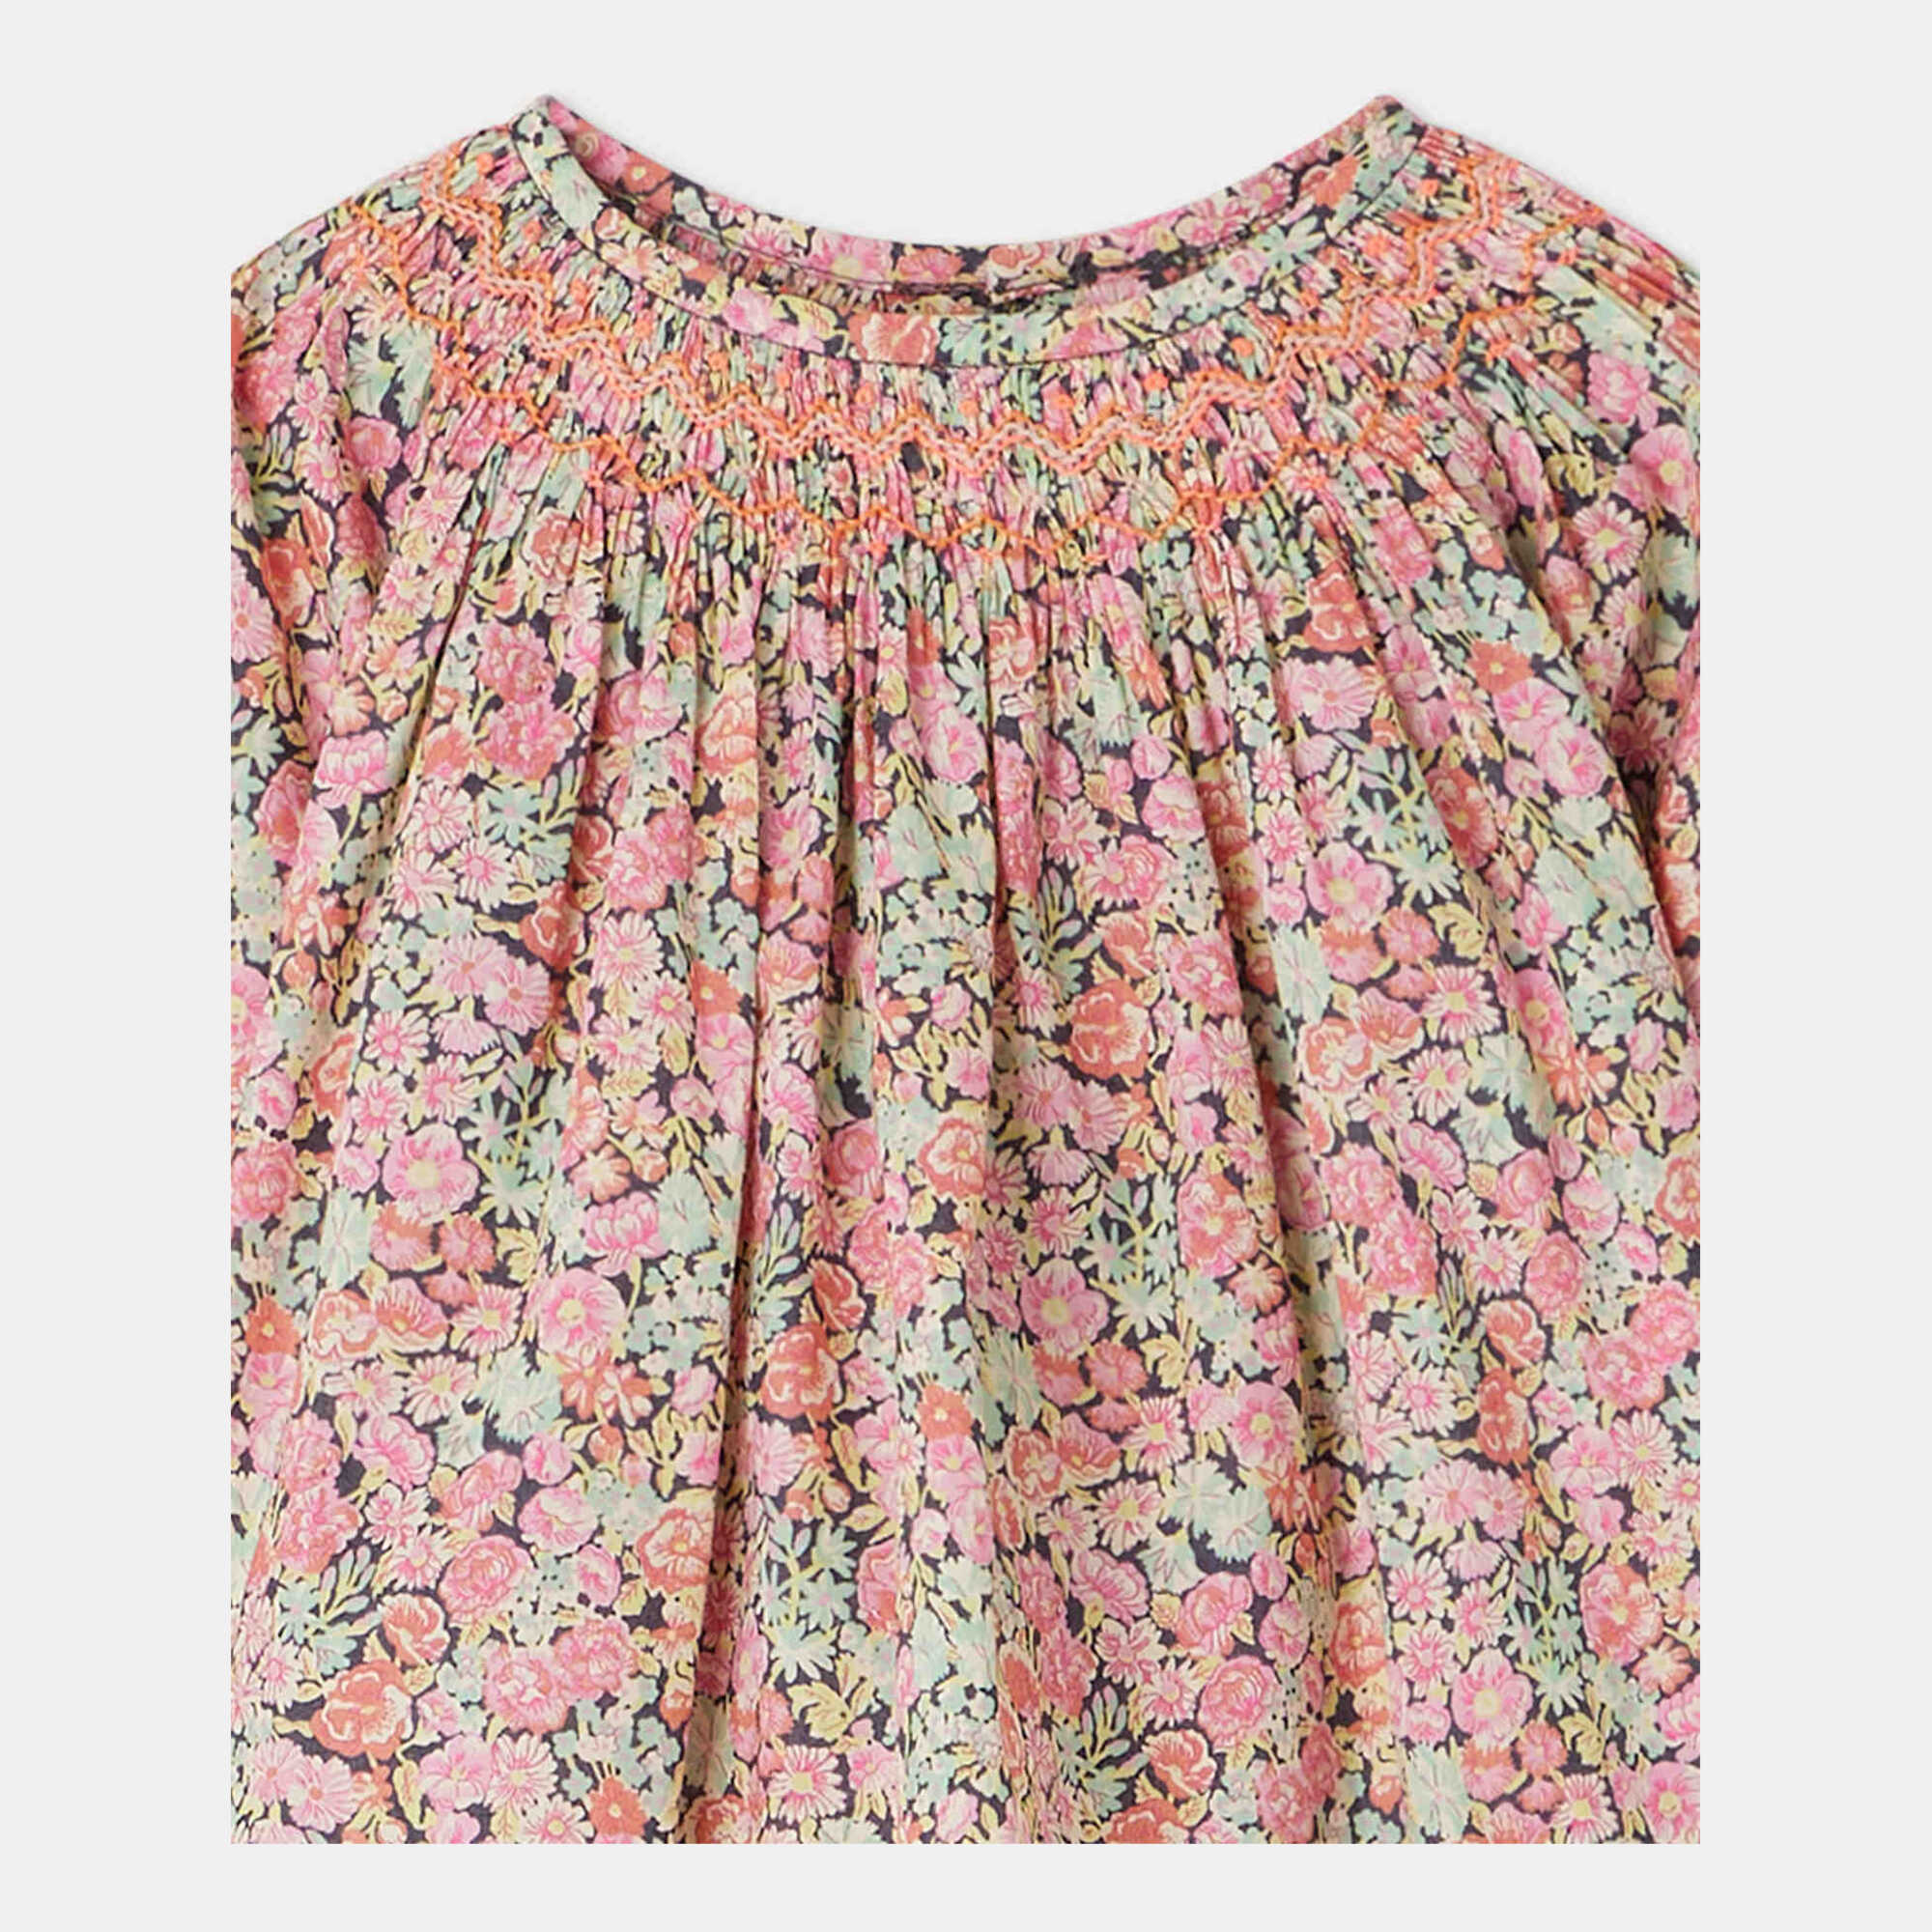 Baby Girls Pink Floral Cotton Top